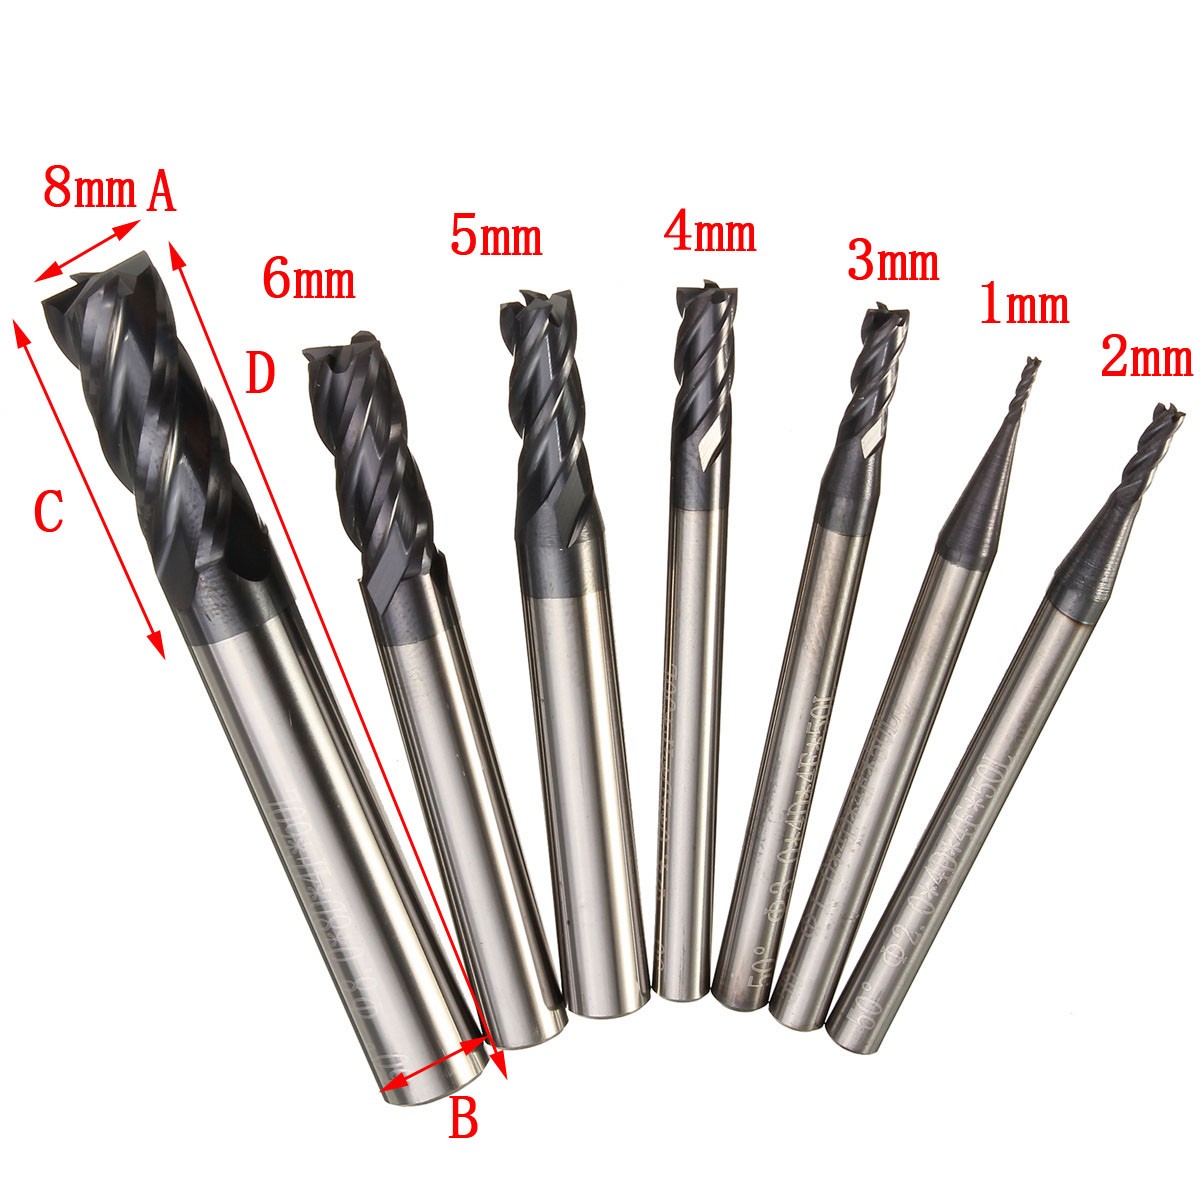 4mm Tungsten Carbide Coated 4 Flute End Mill CNC Milling Cutter Drill Bit Tool 